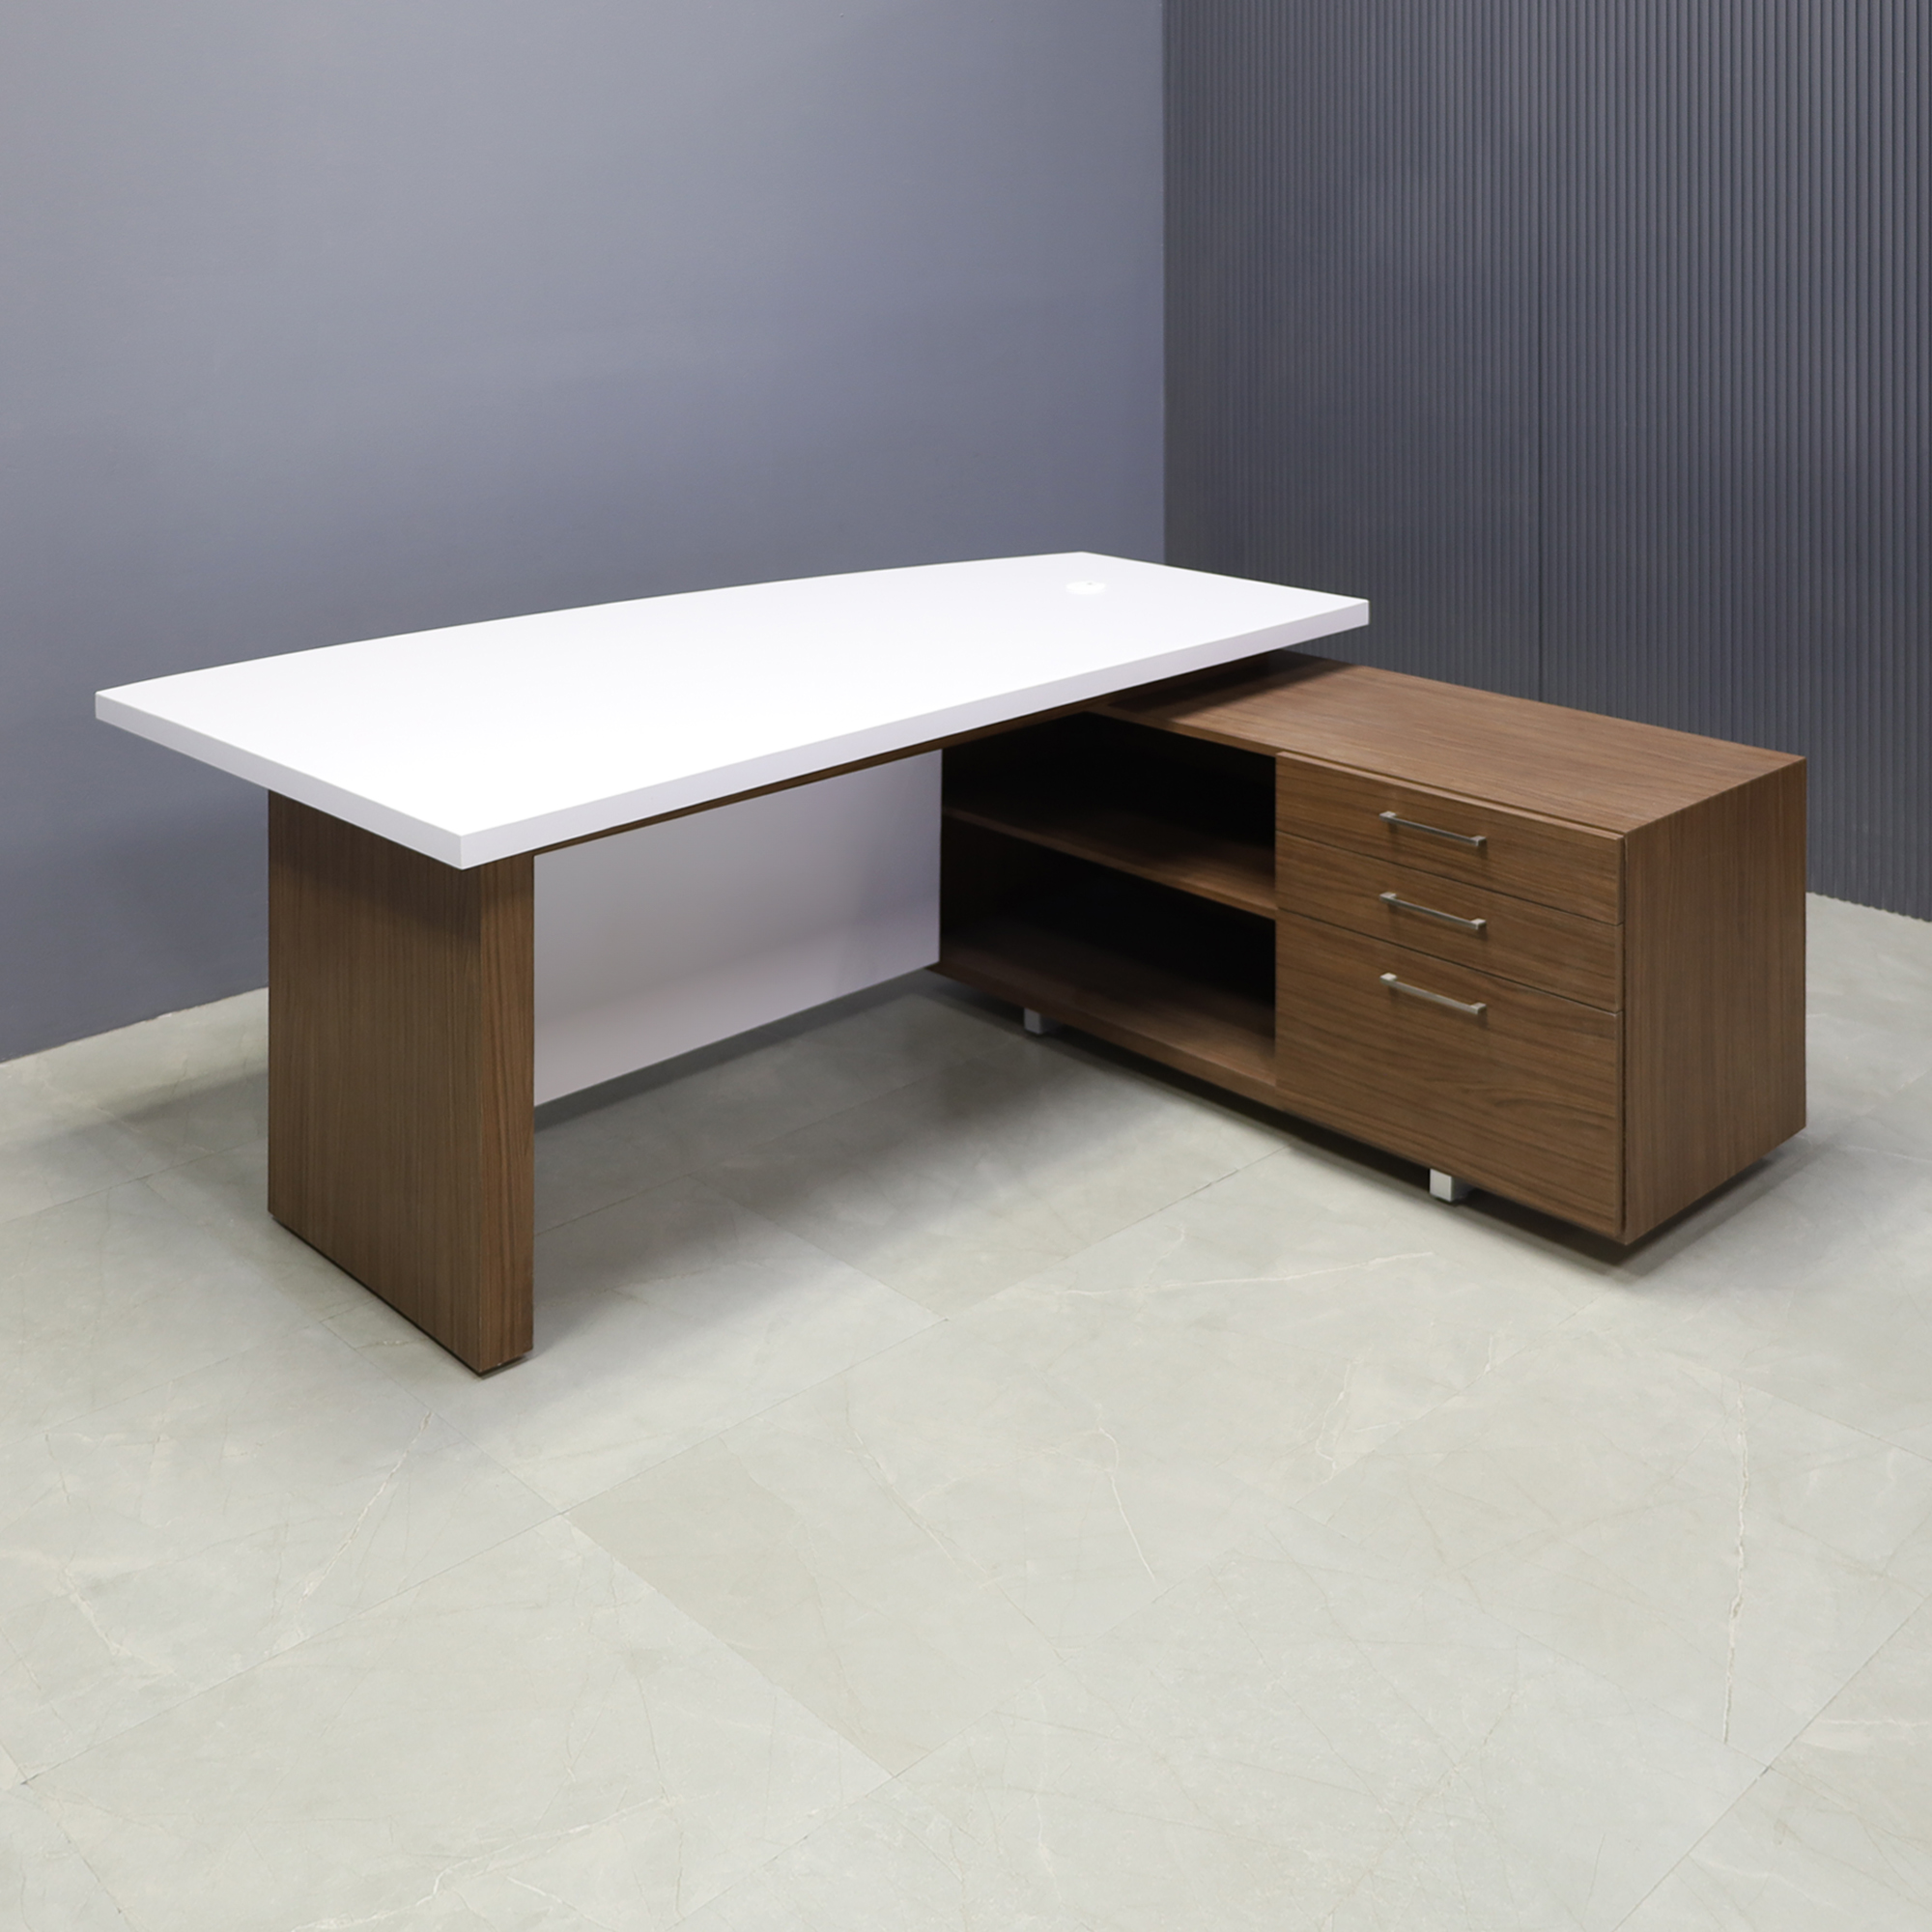 72-inch Avenue Curved Executive Desk W/ Credenza on right side when sitting, in white matte laminate top and privacy panel, with walnut heights matte laminate on the base, leg and credenza shown here.